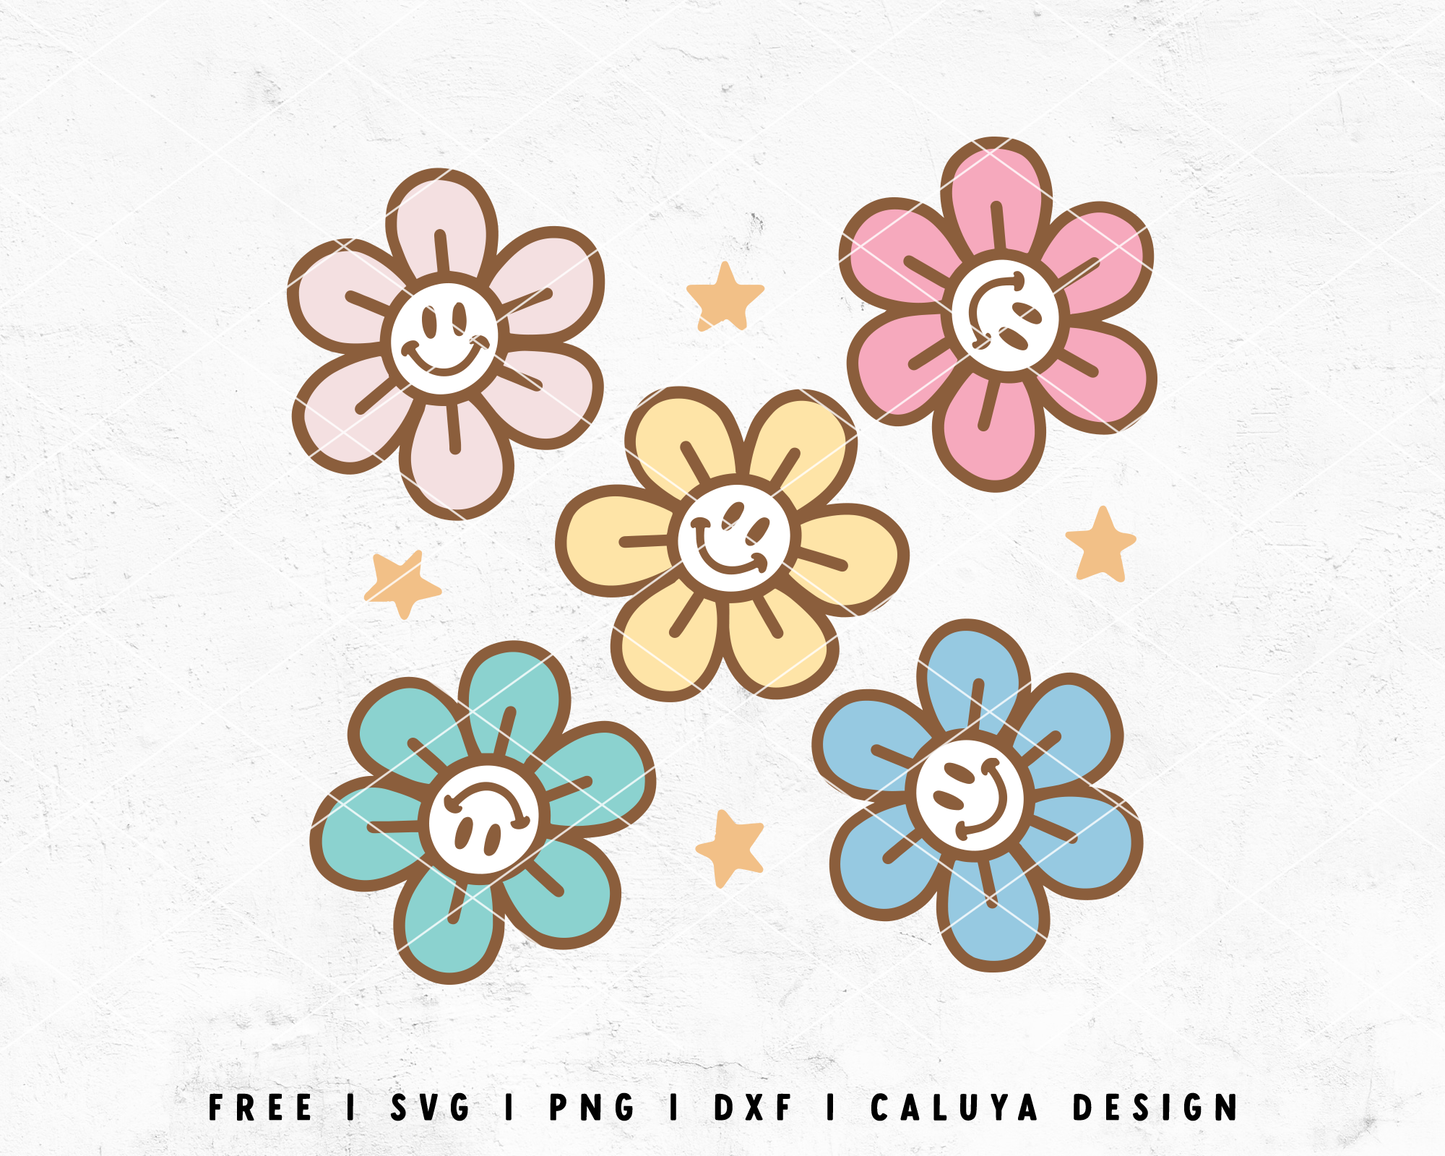 FREE Flower Smiley Face SVG | Groovy SVG Cut File for Cricut, Cameo Silhouette | Free SVG Cut File